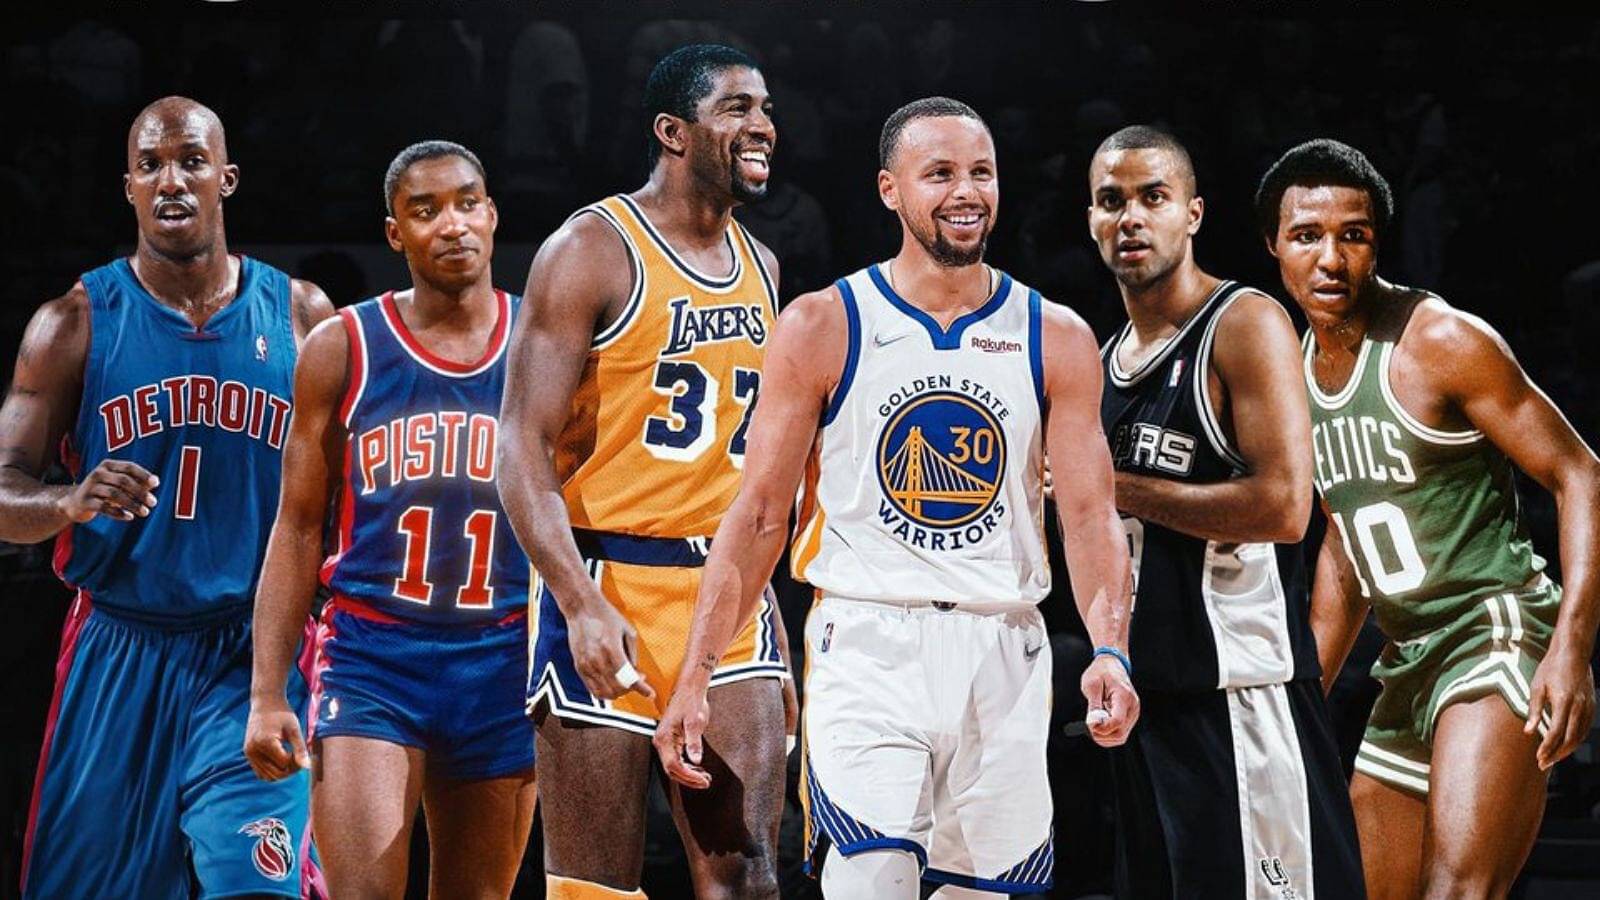 One of only 6 point guards to ever win Finals MVP, Stephen Curry, is the highest point-getter over Magic Johnson, Isiah Thomas, and other legendary PGs